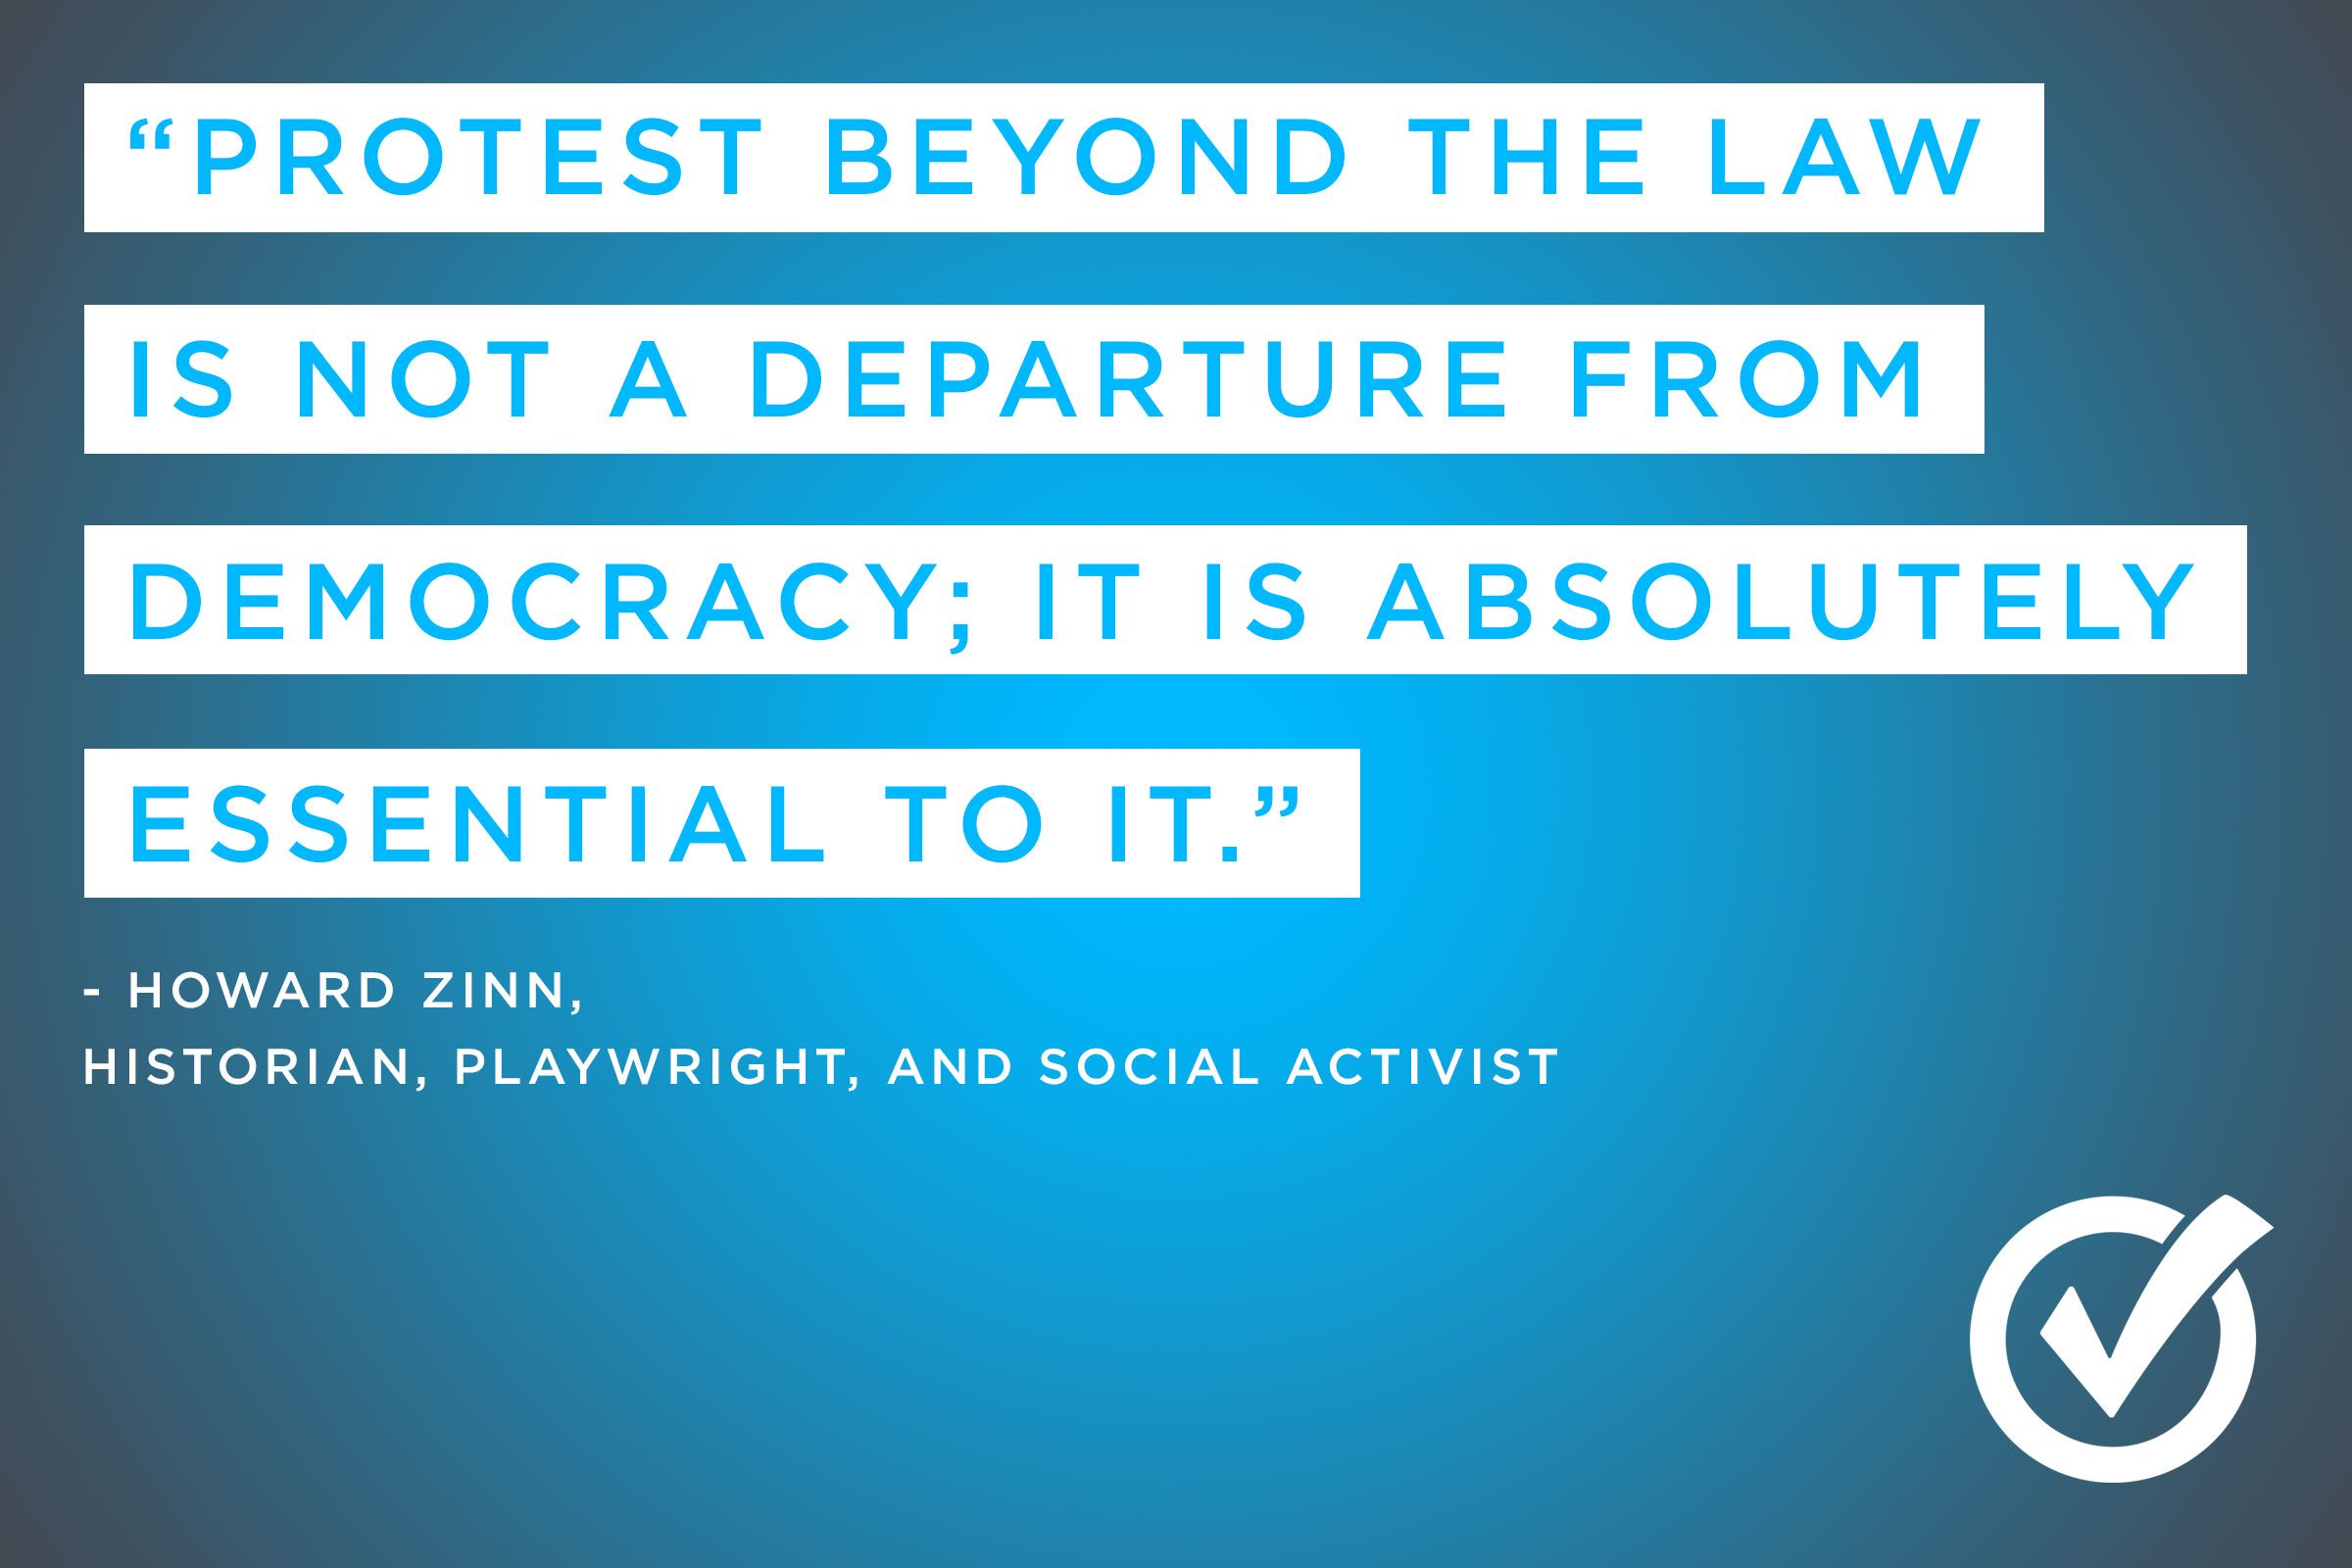 Howard Zinn on the importance of protest